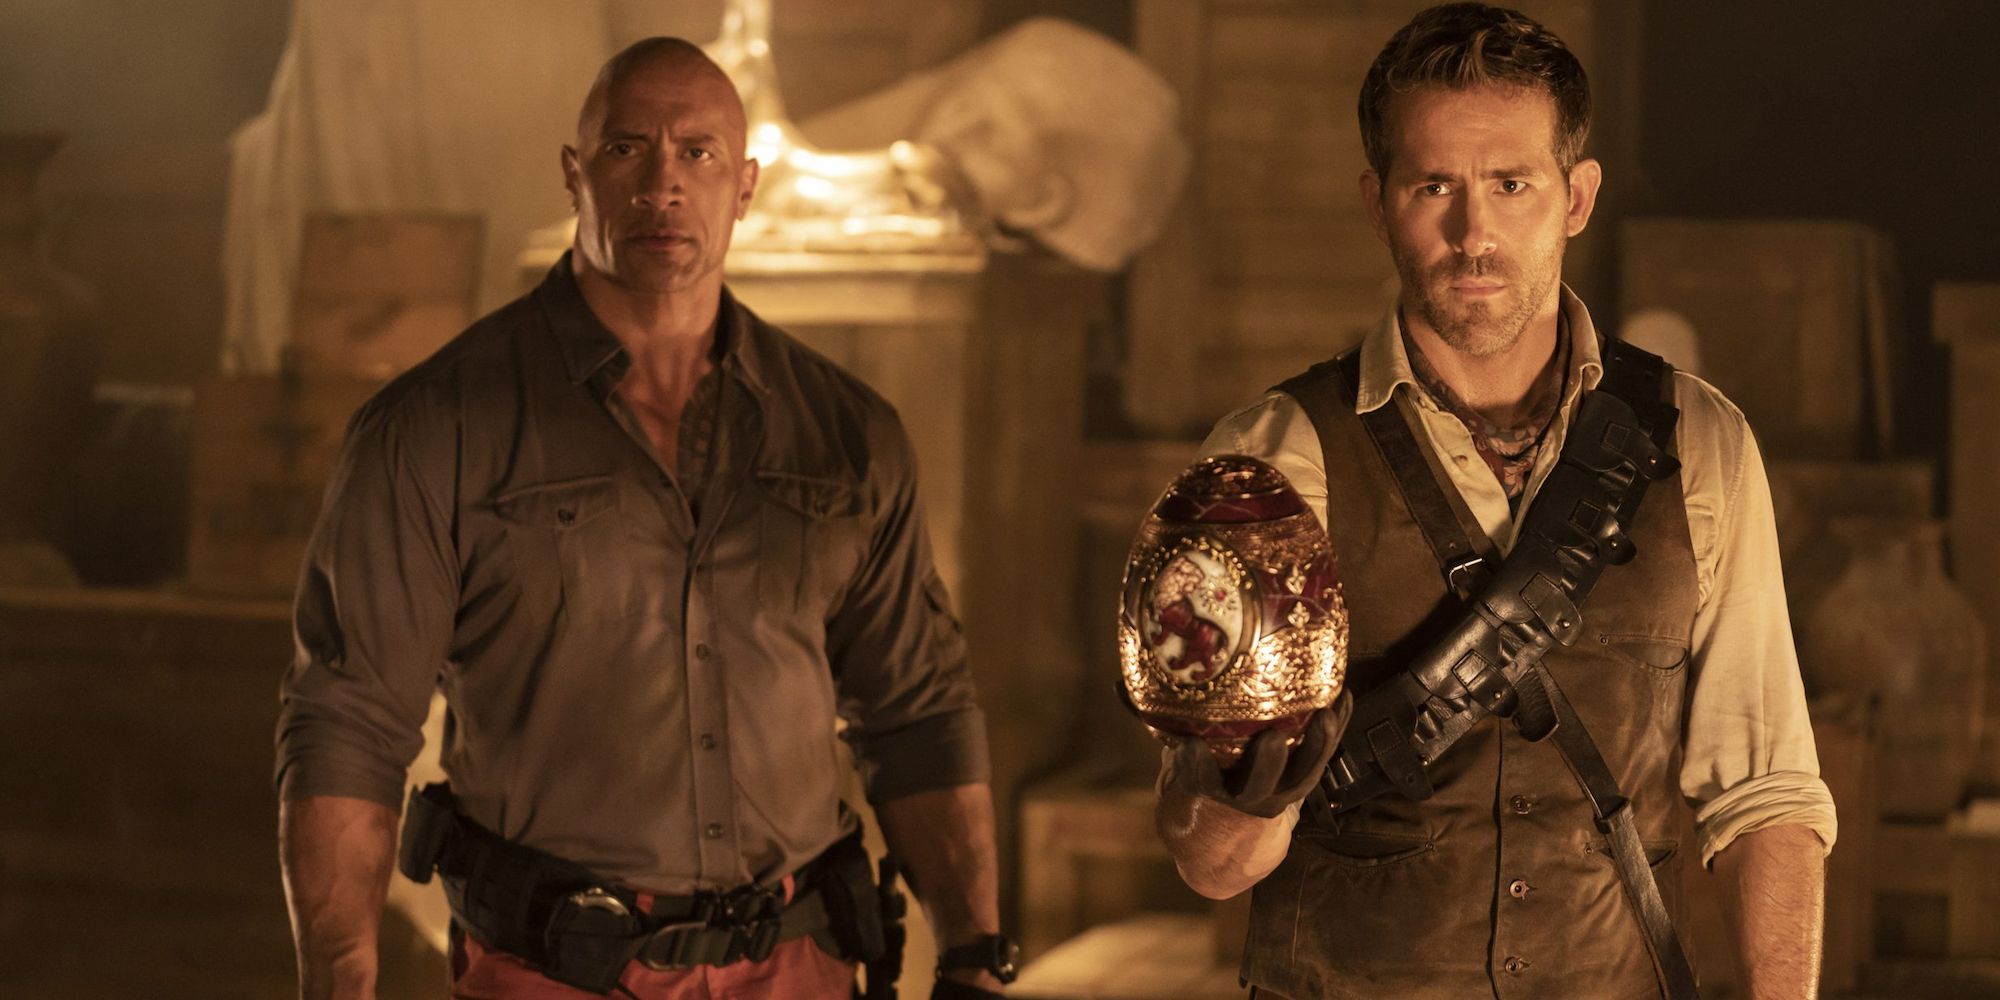 Dwayne The Rock Johnson as John Hartley and Ryan Reynolds as Nolan Booth Holding the Cleopatra Egg in Red Notice